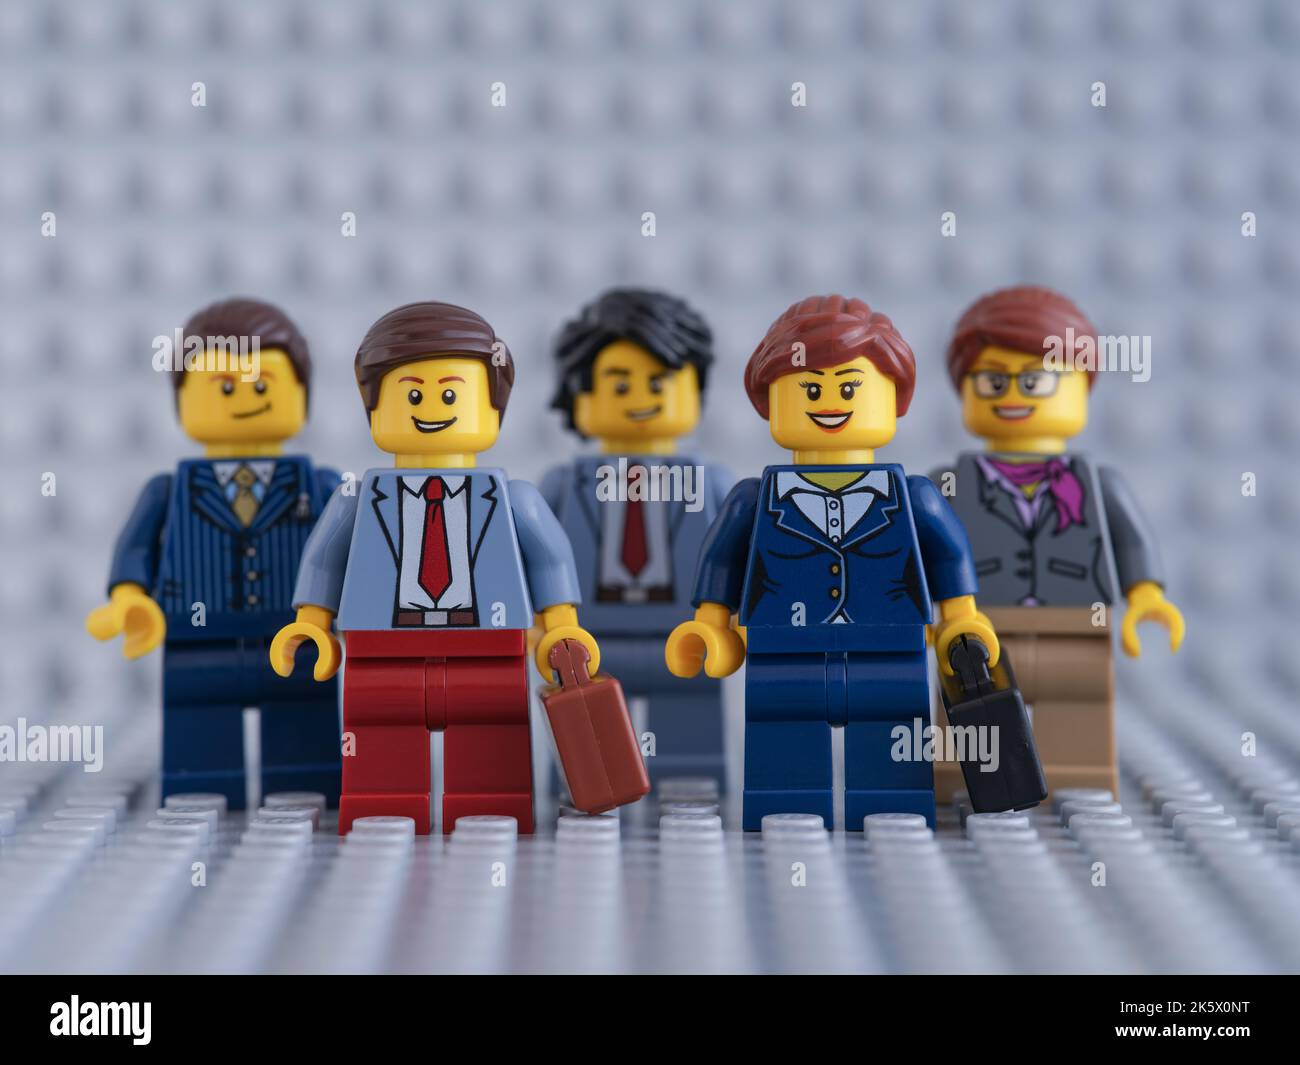 Tambov, Russian Federation - October 09, 2022 Lego businessperson minifigures standing and looking into their successful future. Stock Photo